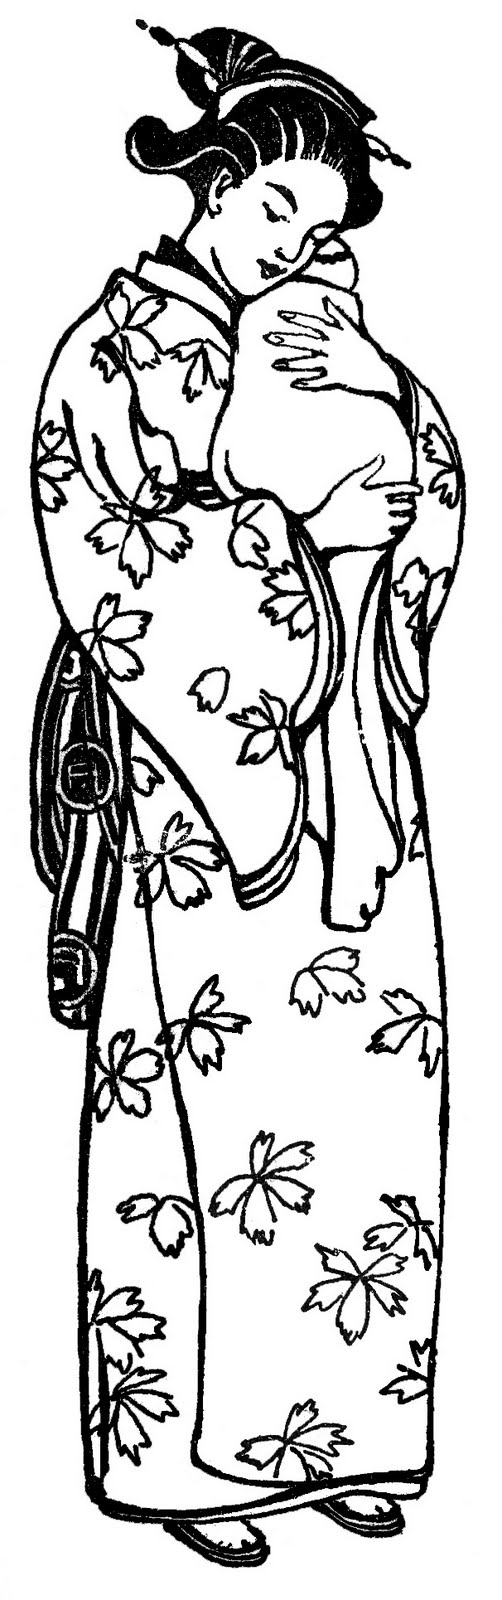 Vintage Clip Art - Japanese Mother in Kimono - The Graphics Fairy